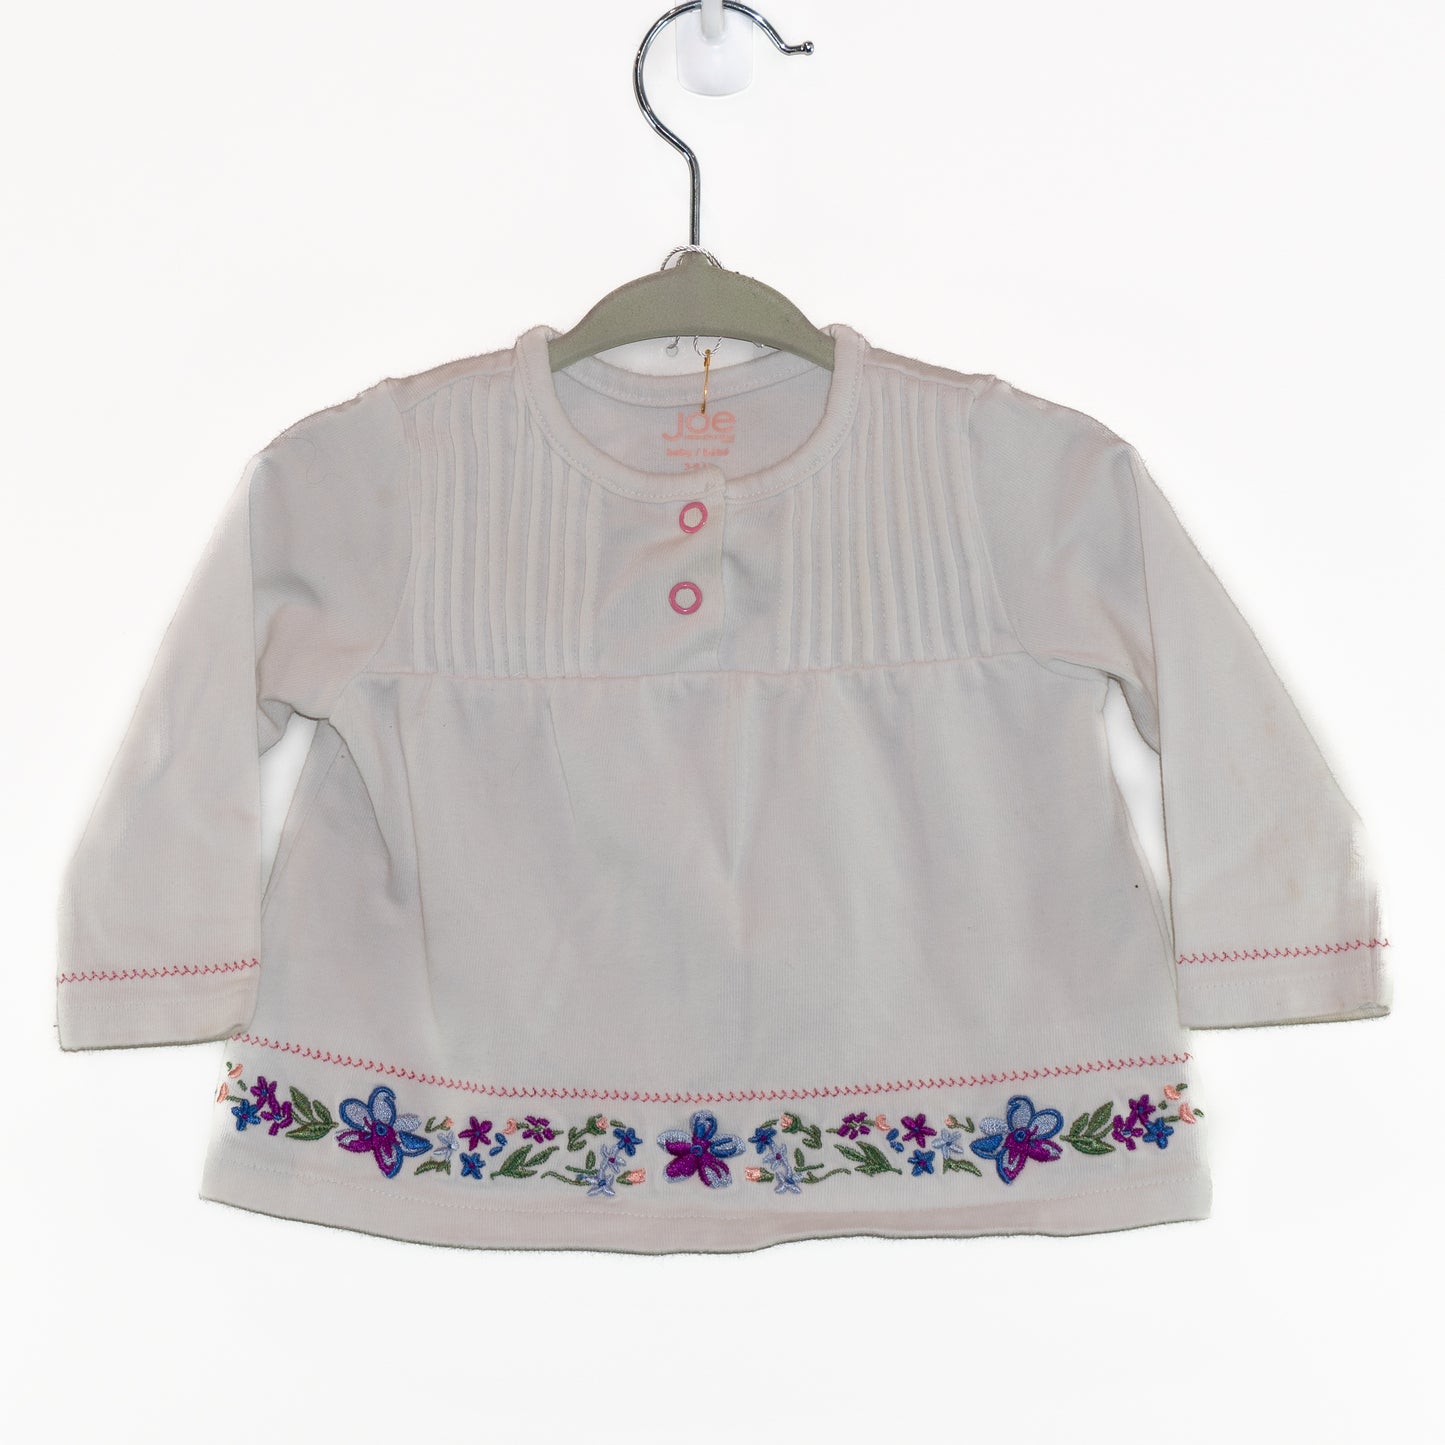 Embroidered Long-sleeve Shirt Size 3-6m